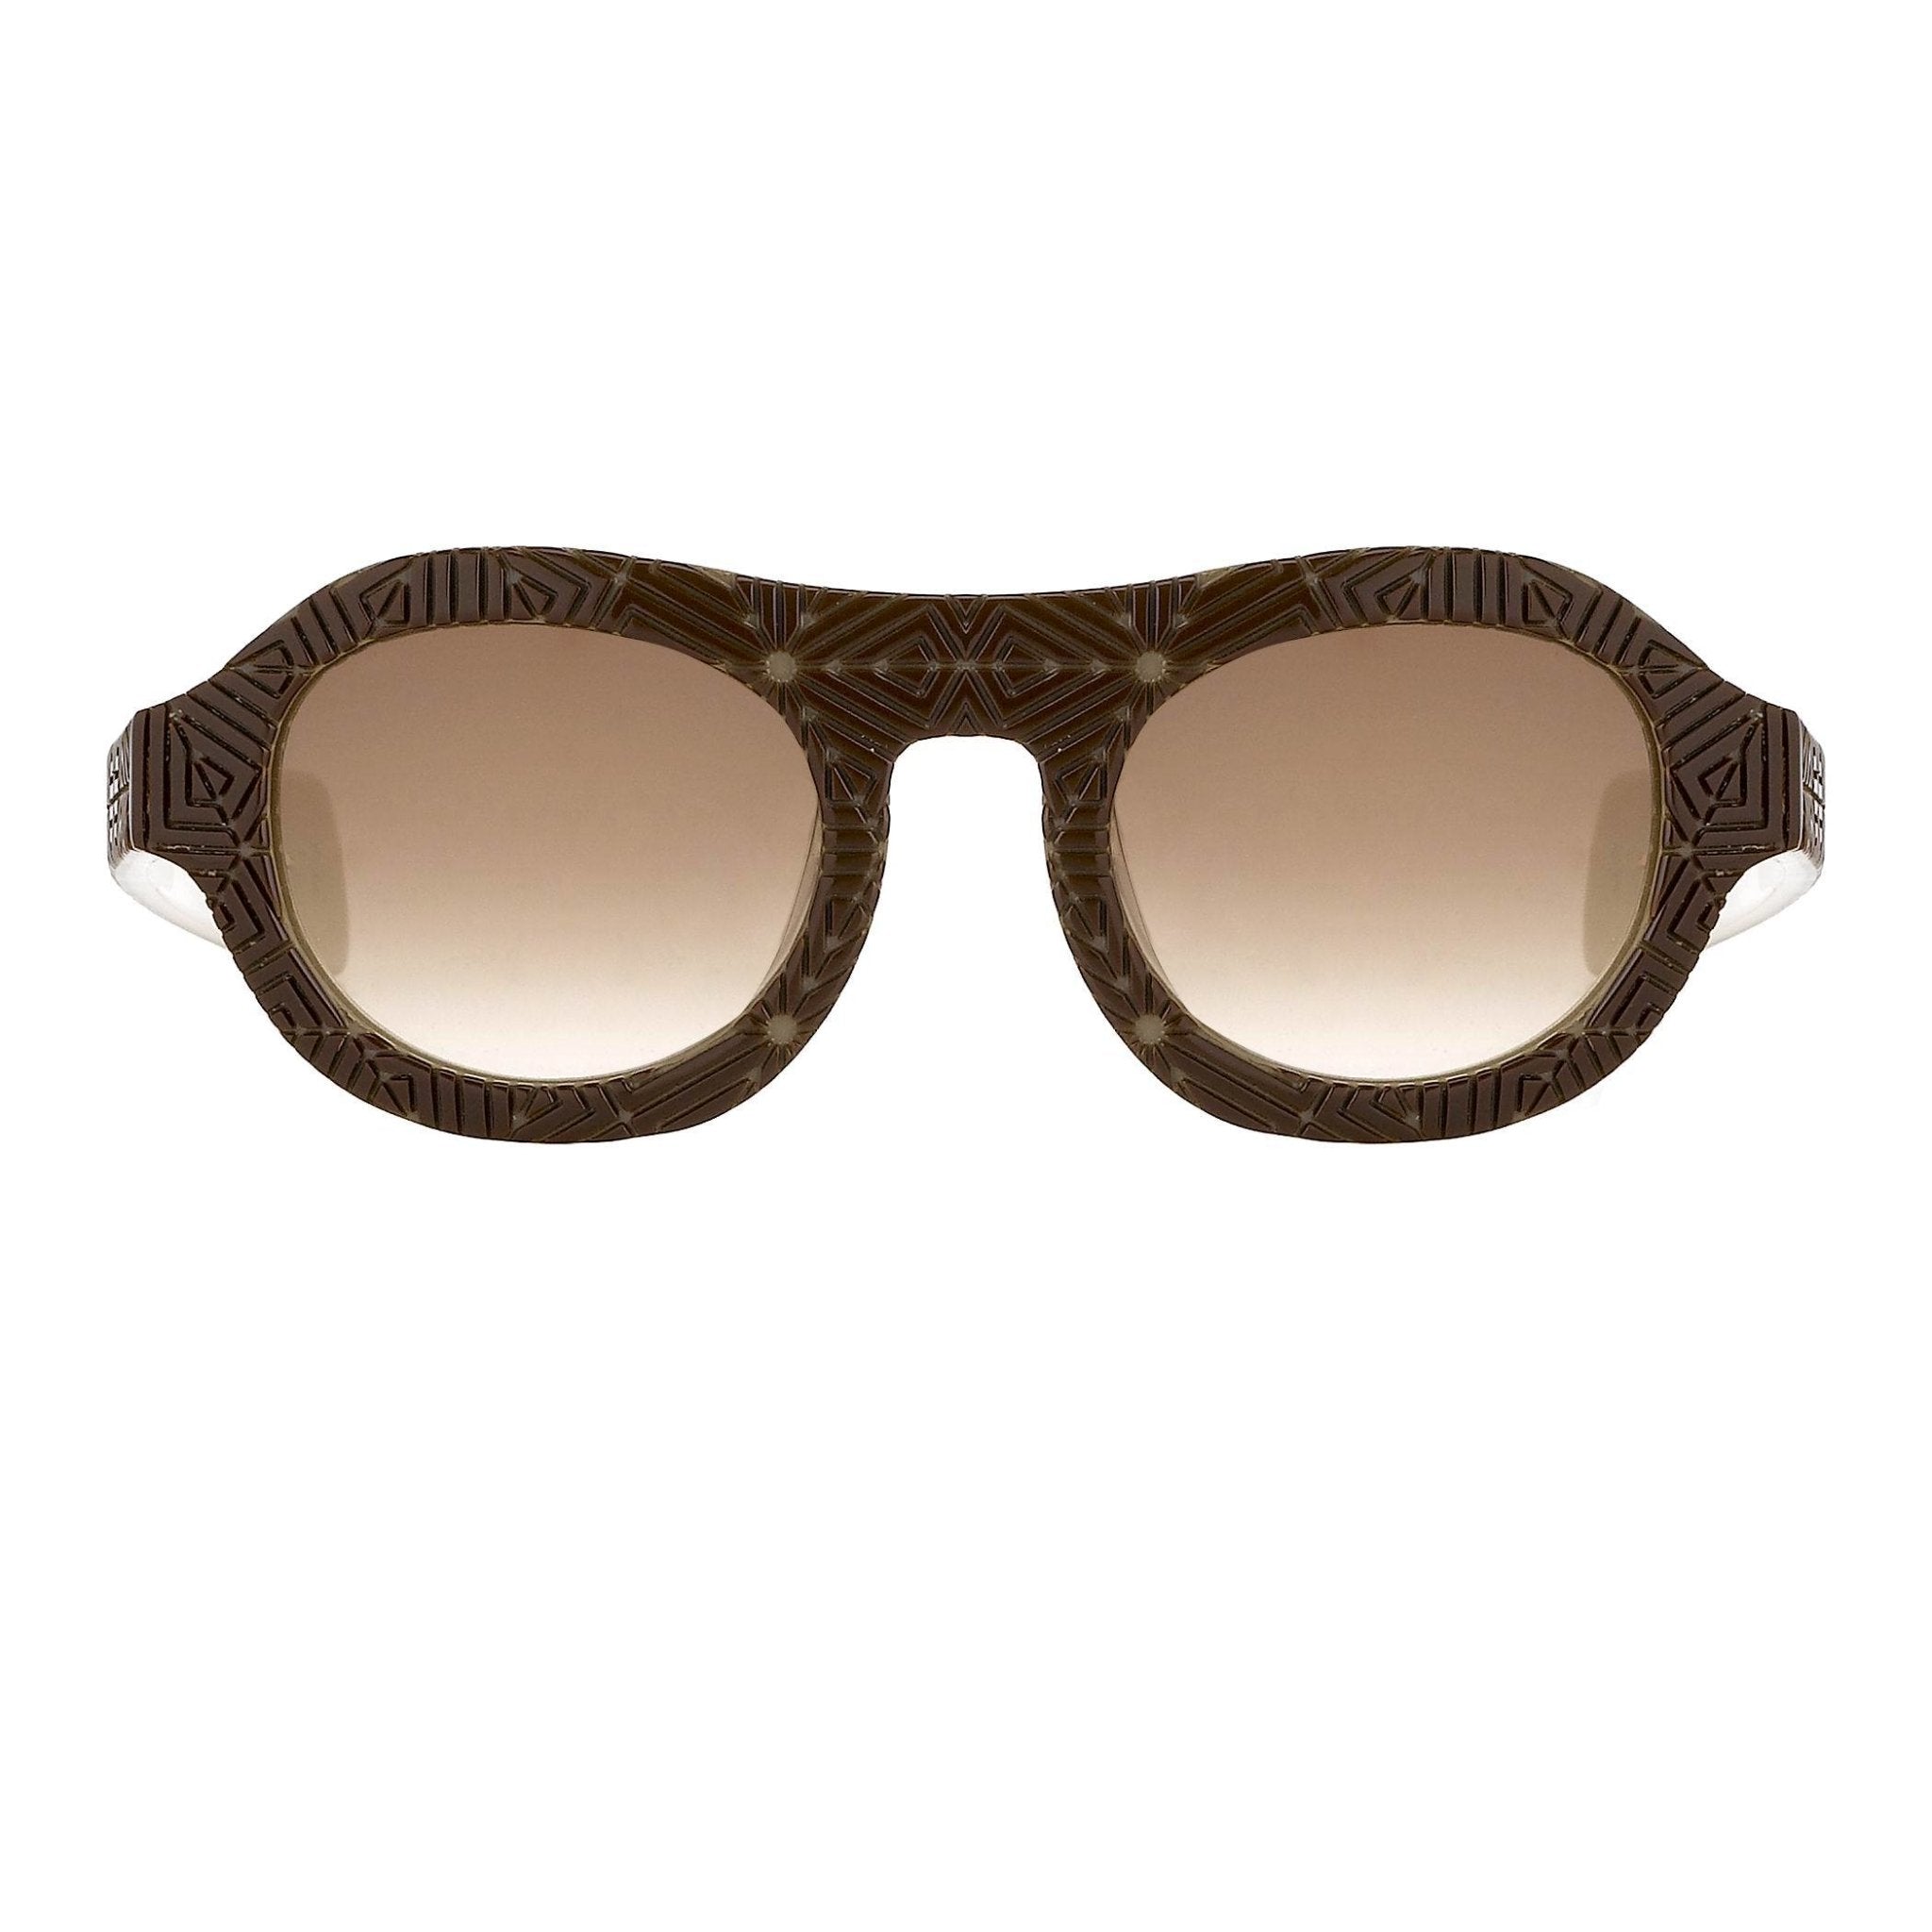 David David Sunglasses Oval Solid Brown Mink Cream With Brown Lenses Category 3 9DAVID1C4BLACKMINK - Watches & Crystals